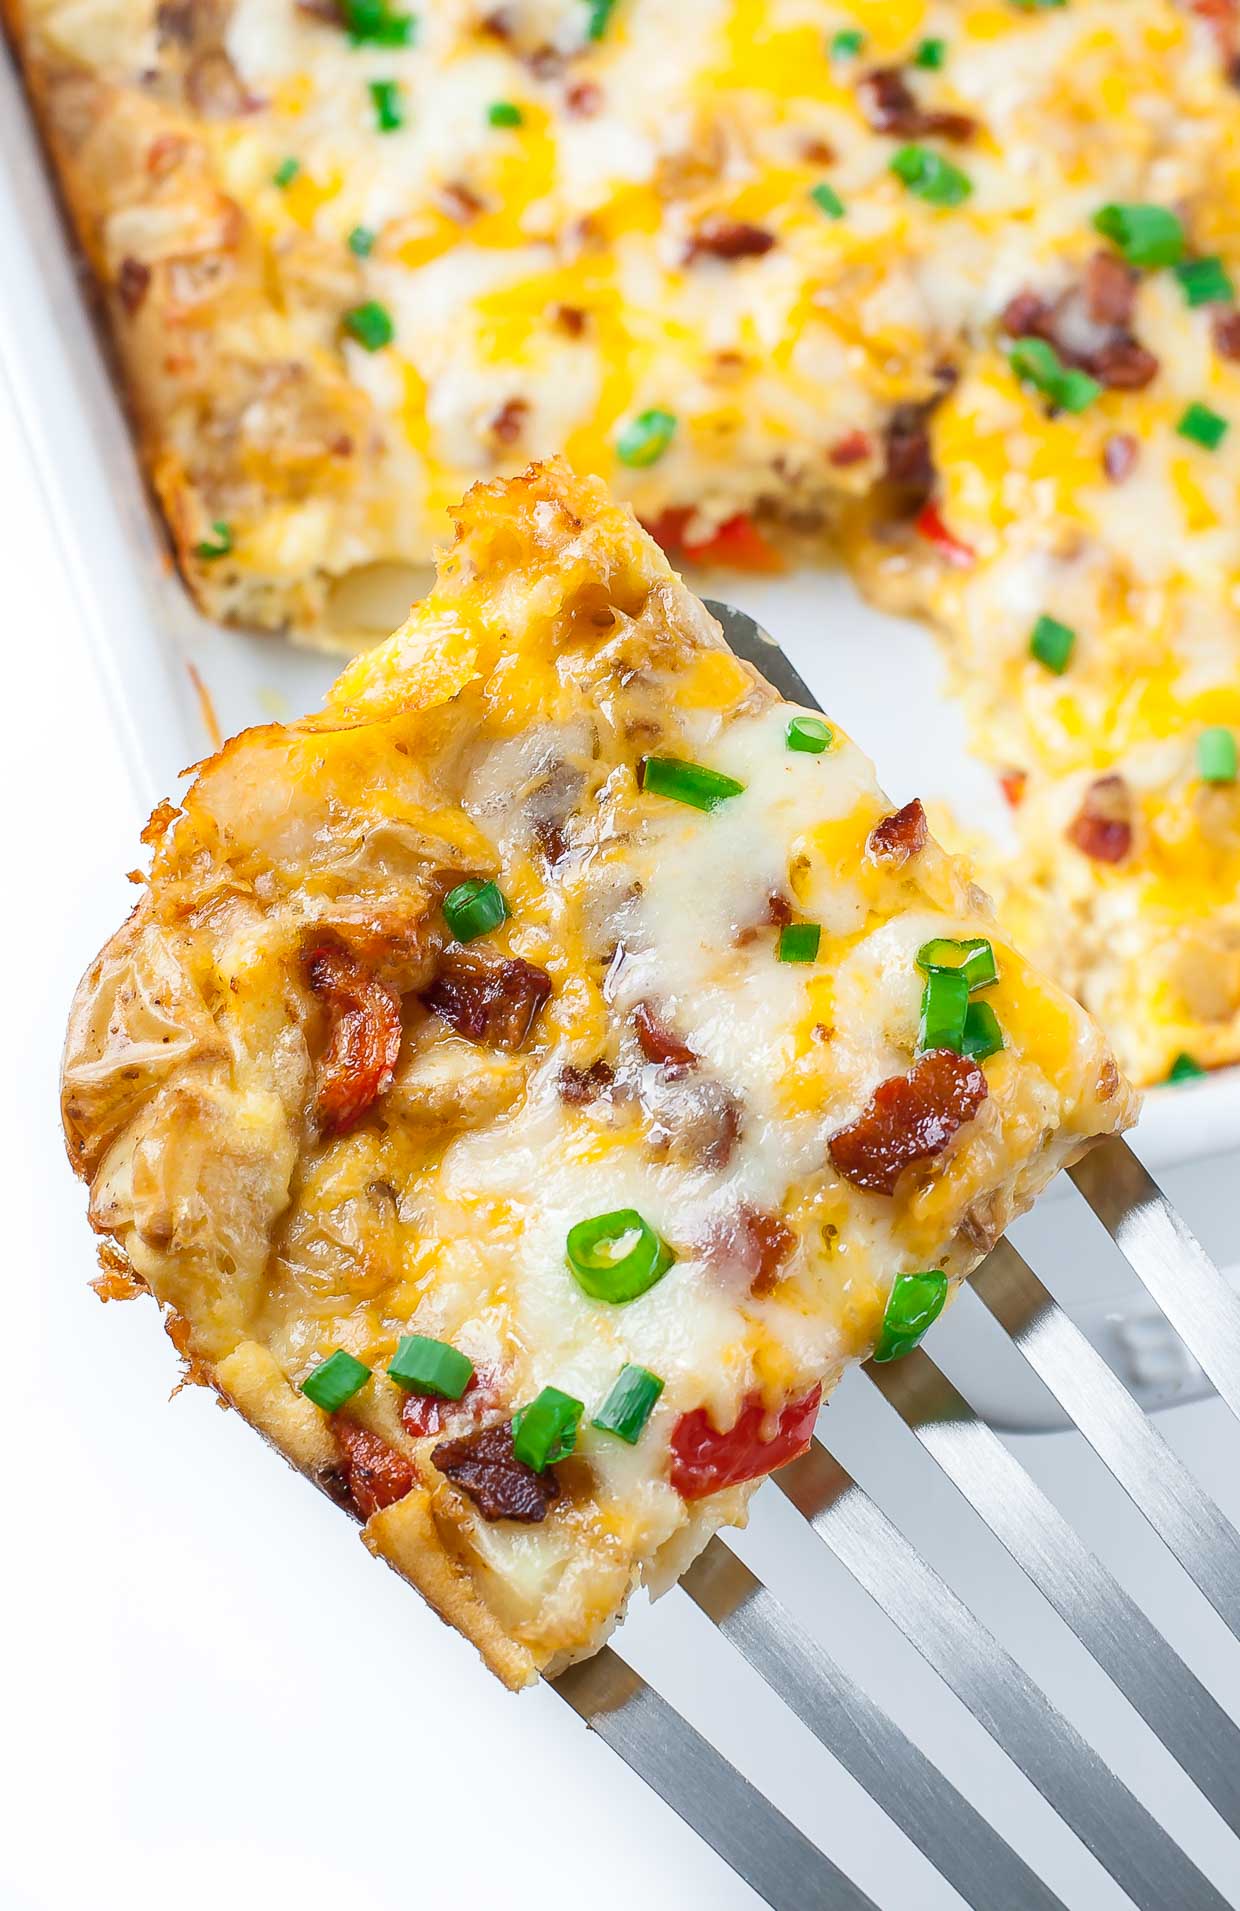 This easy Cheesy Roasted Potato Breakfast Bake is a tasty way to sneak veggies into your breakfast! Served up casserole style, it's great for holidays or a brag-worthy brunch with family and friends.